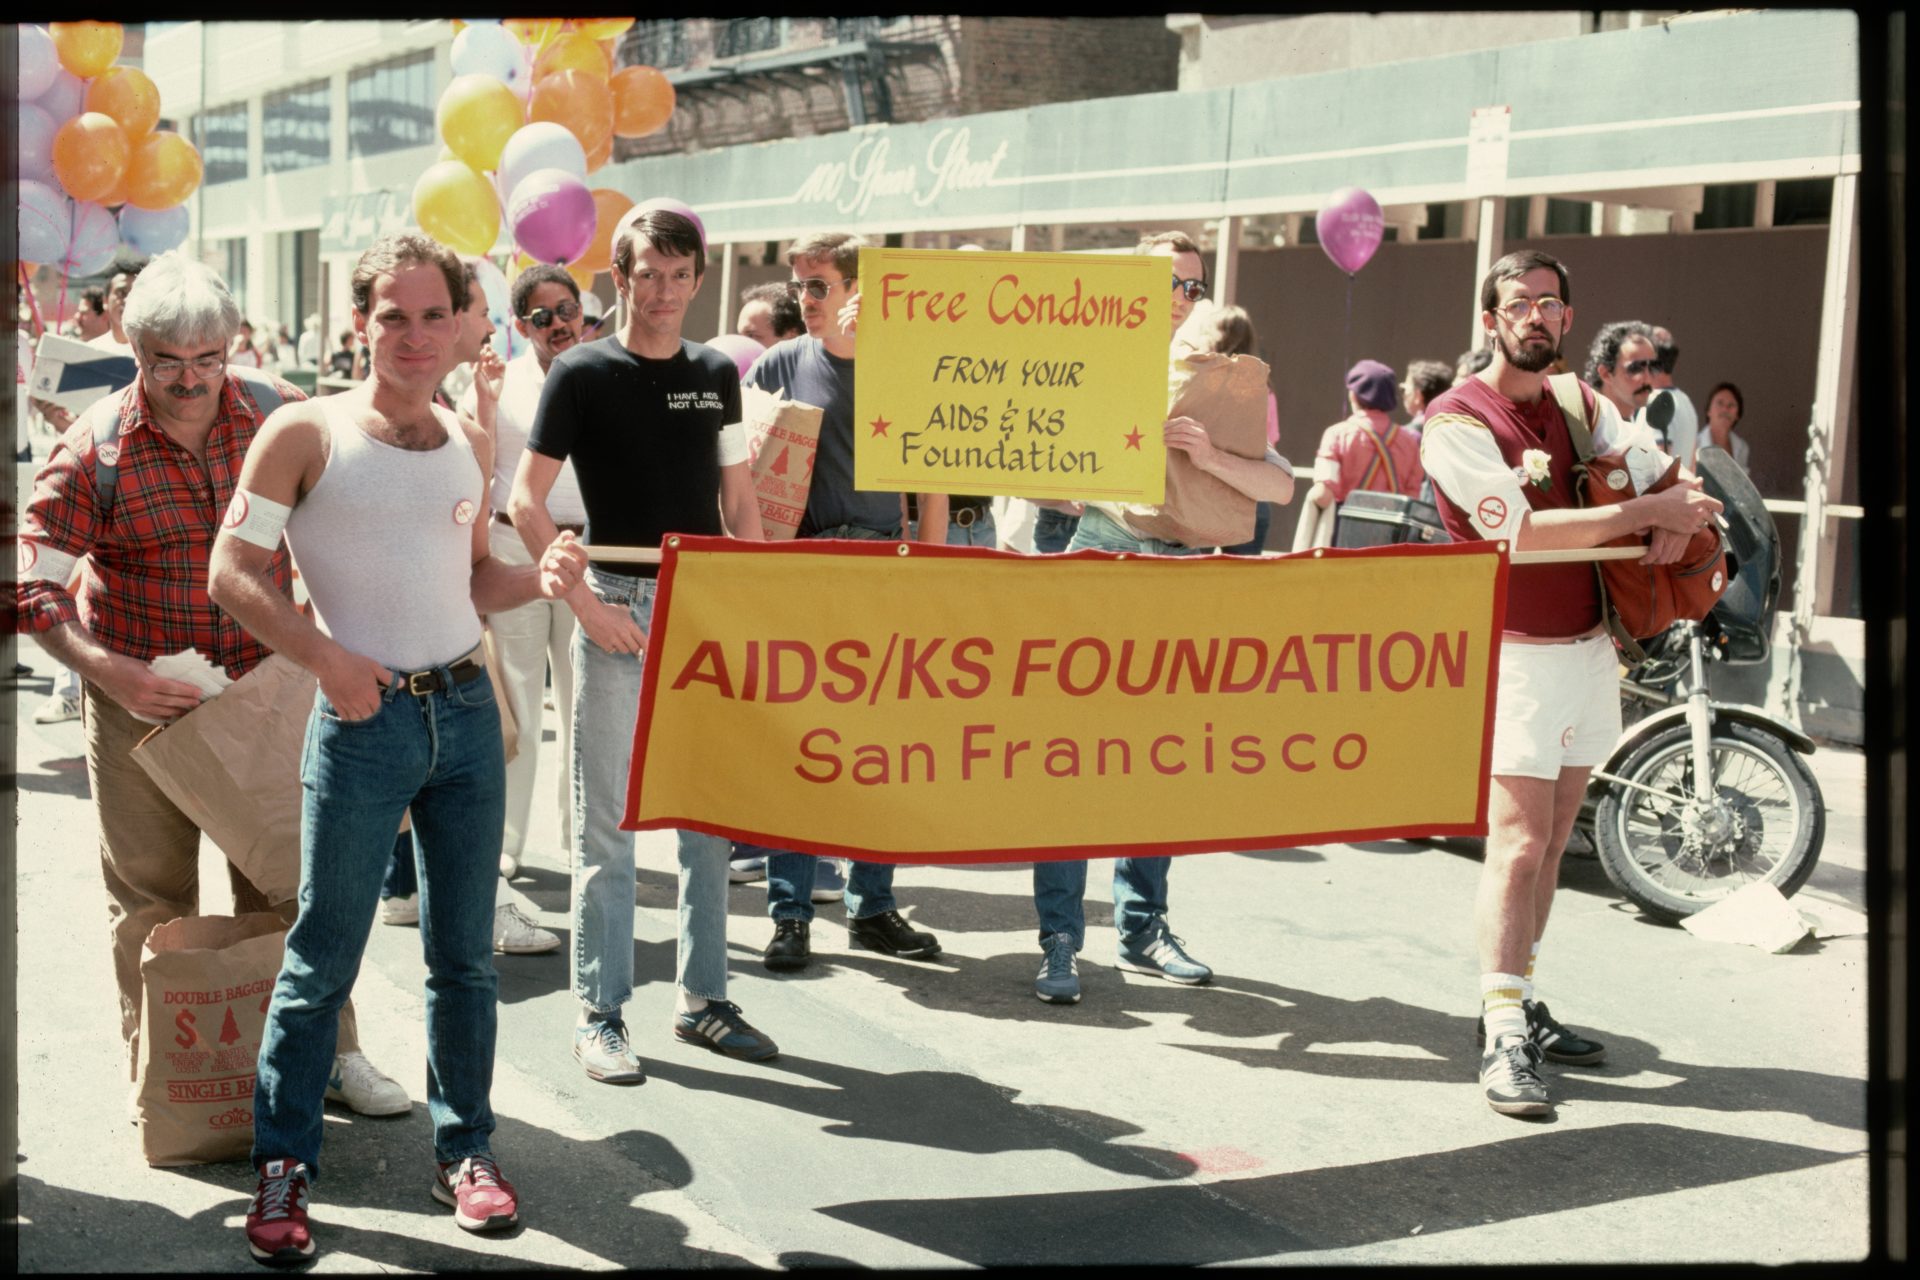 1982 - A new disease get its name: AIDS